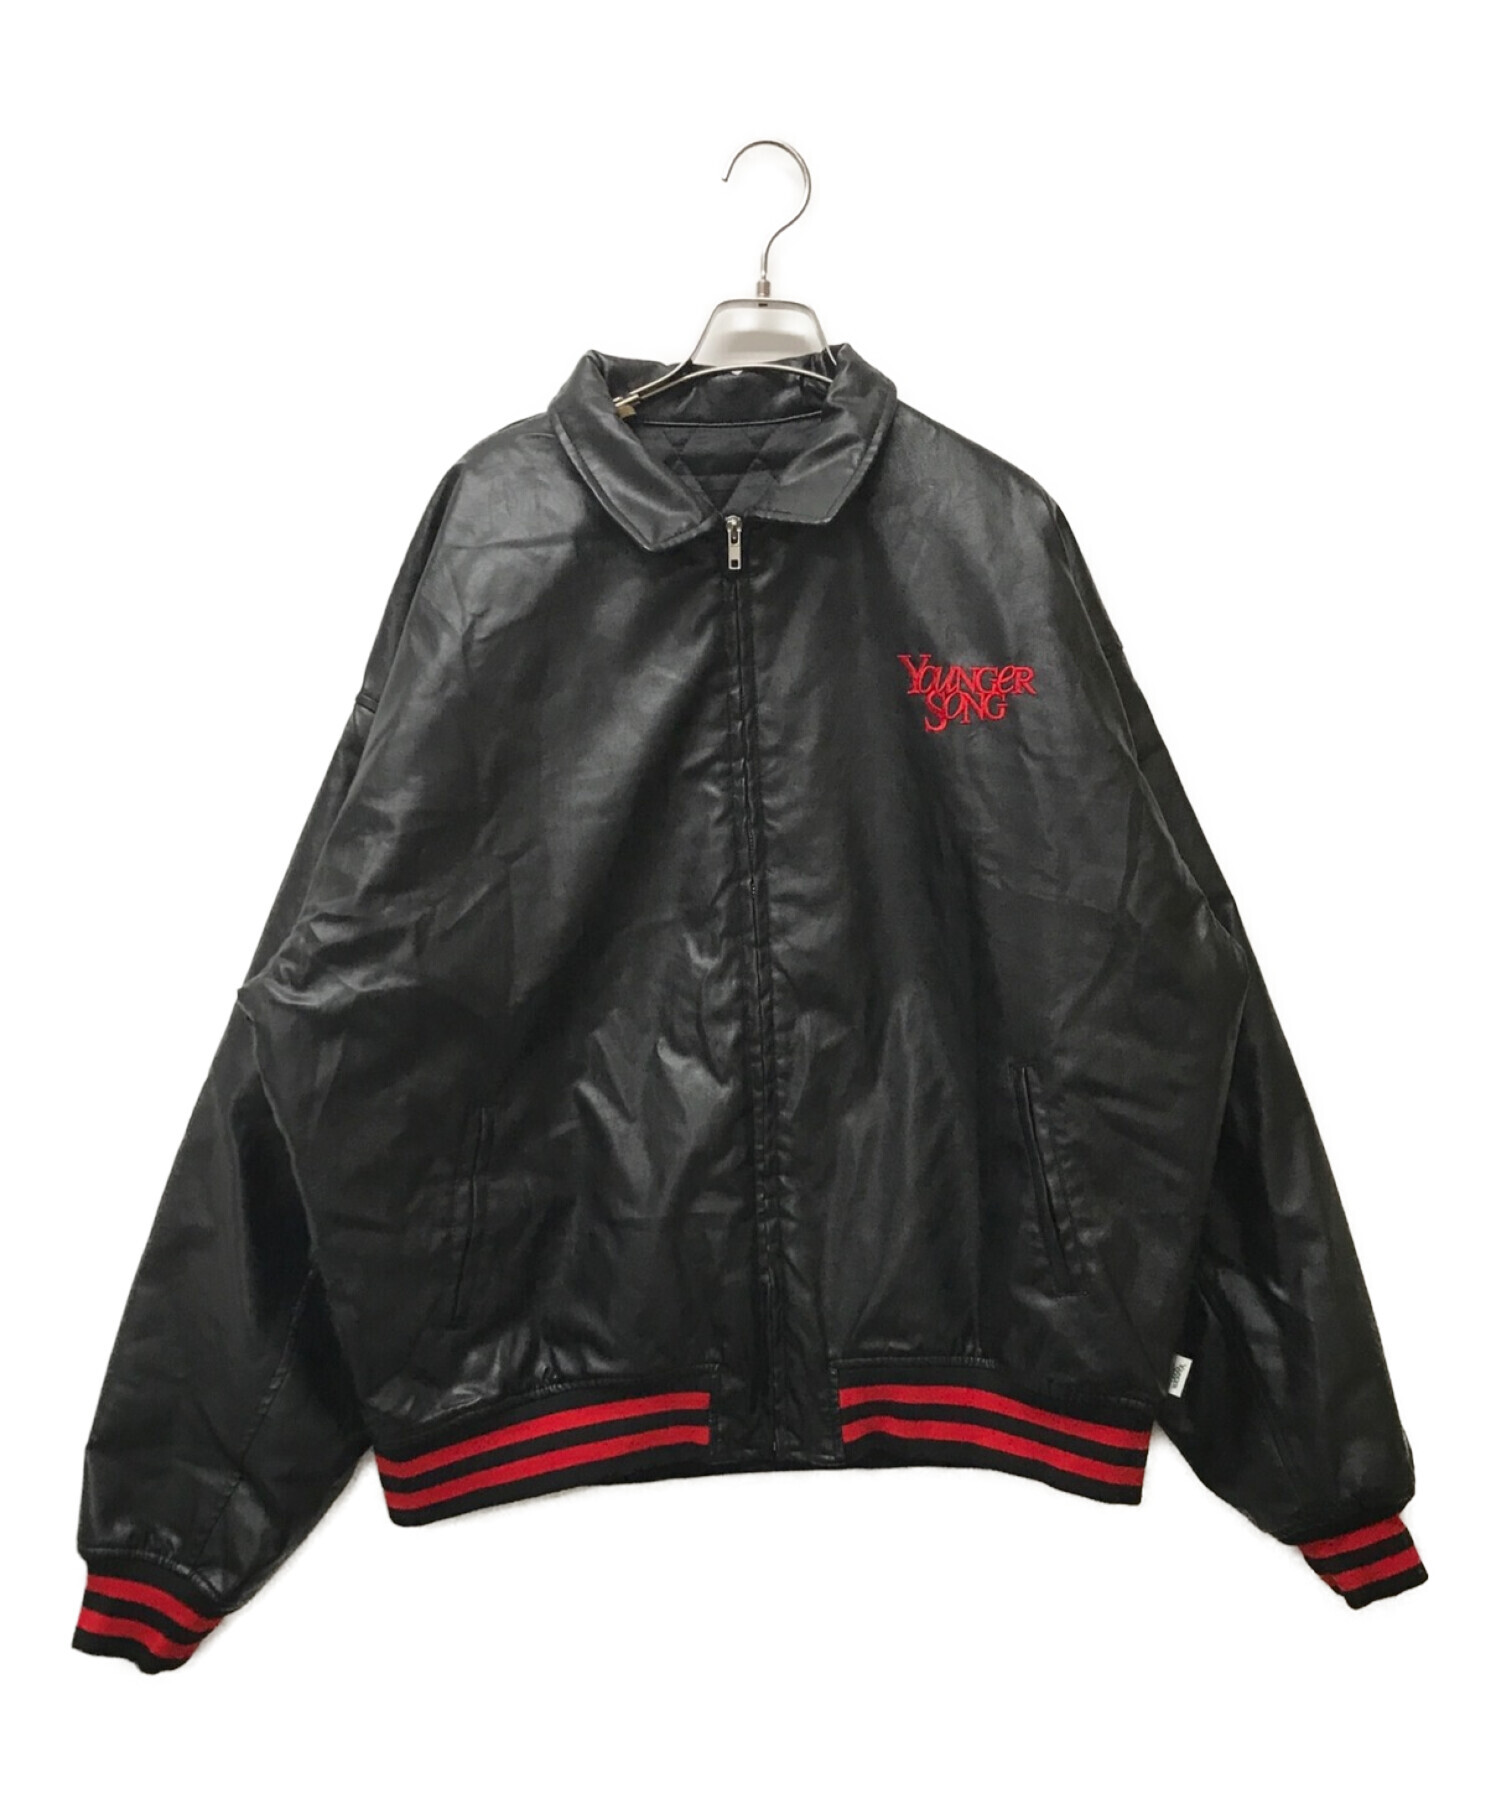 Younger Song Leather Stadium Jacket